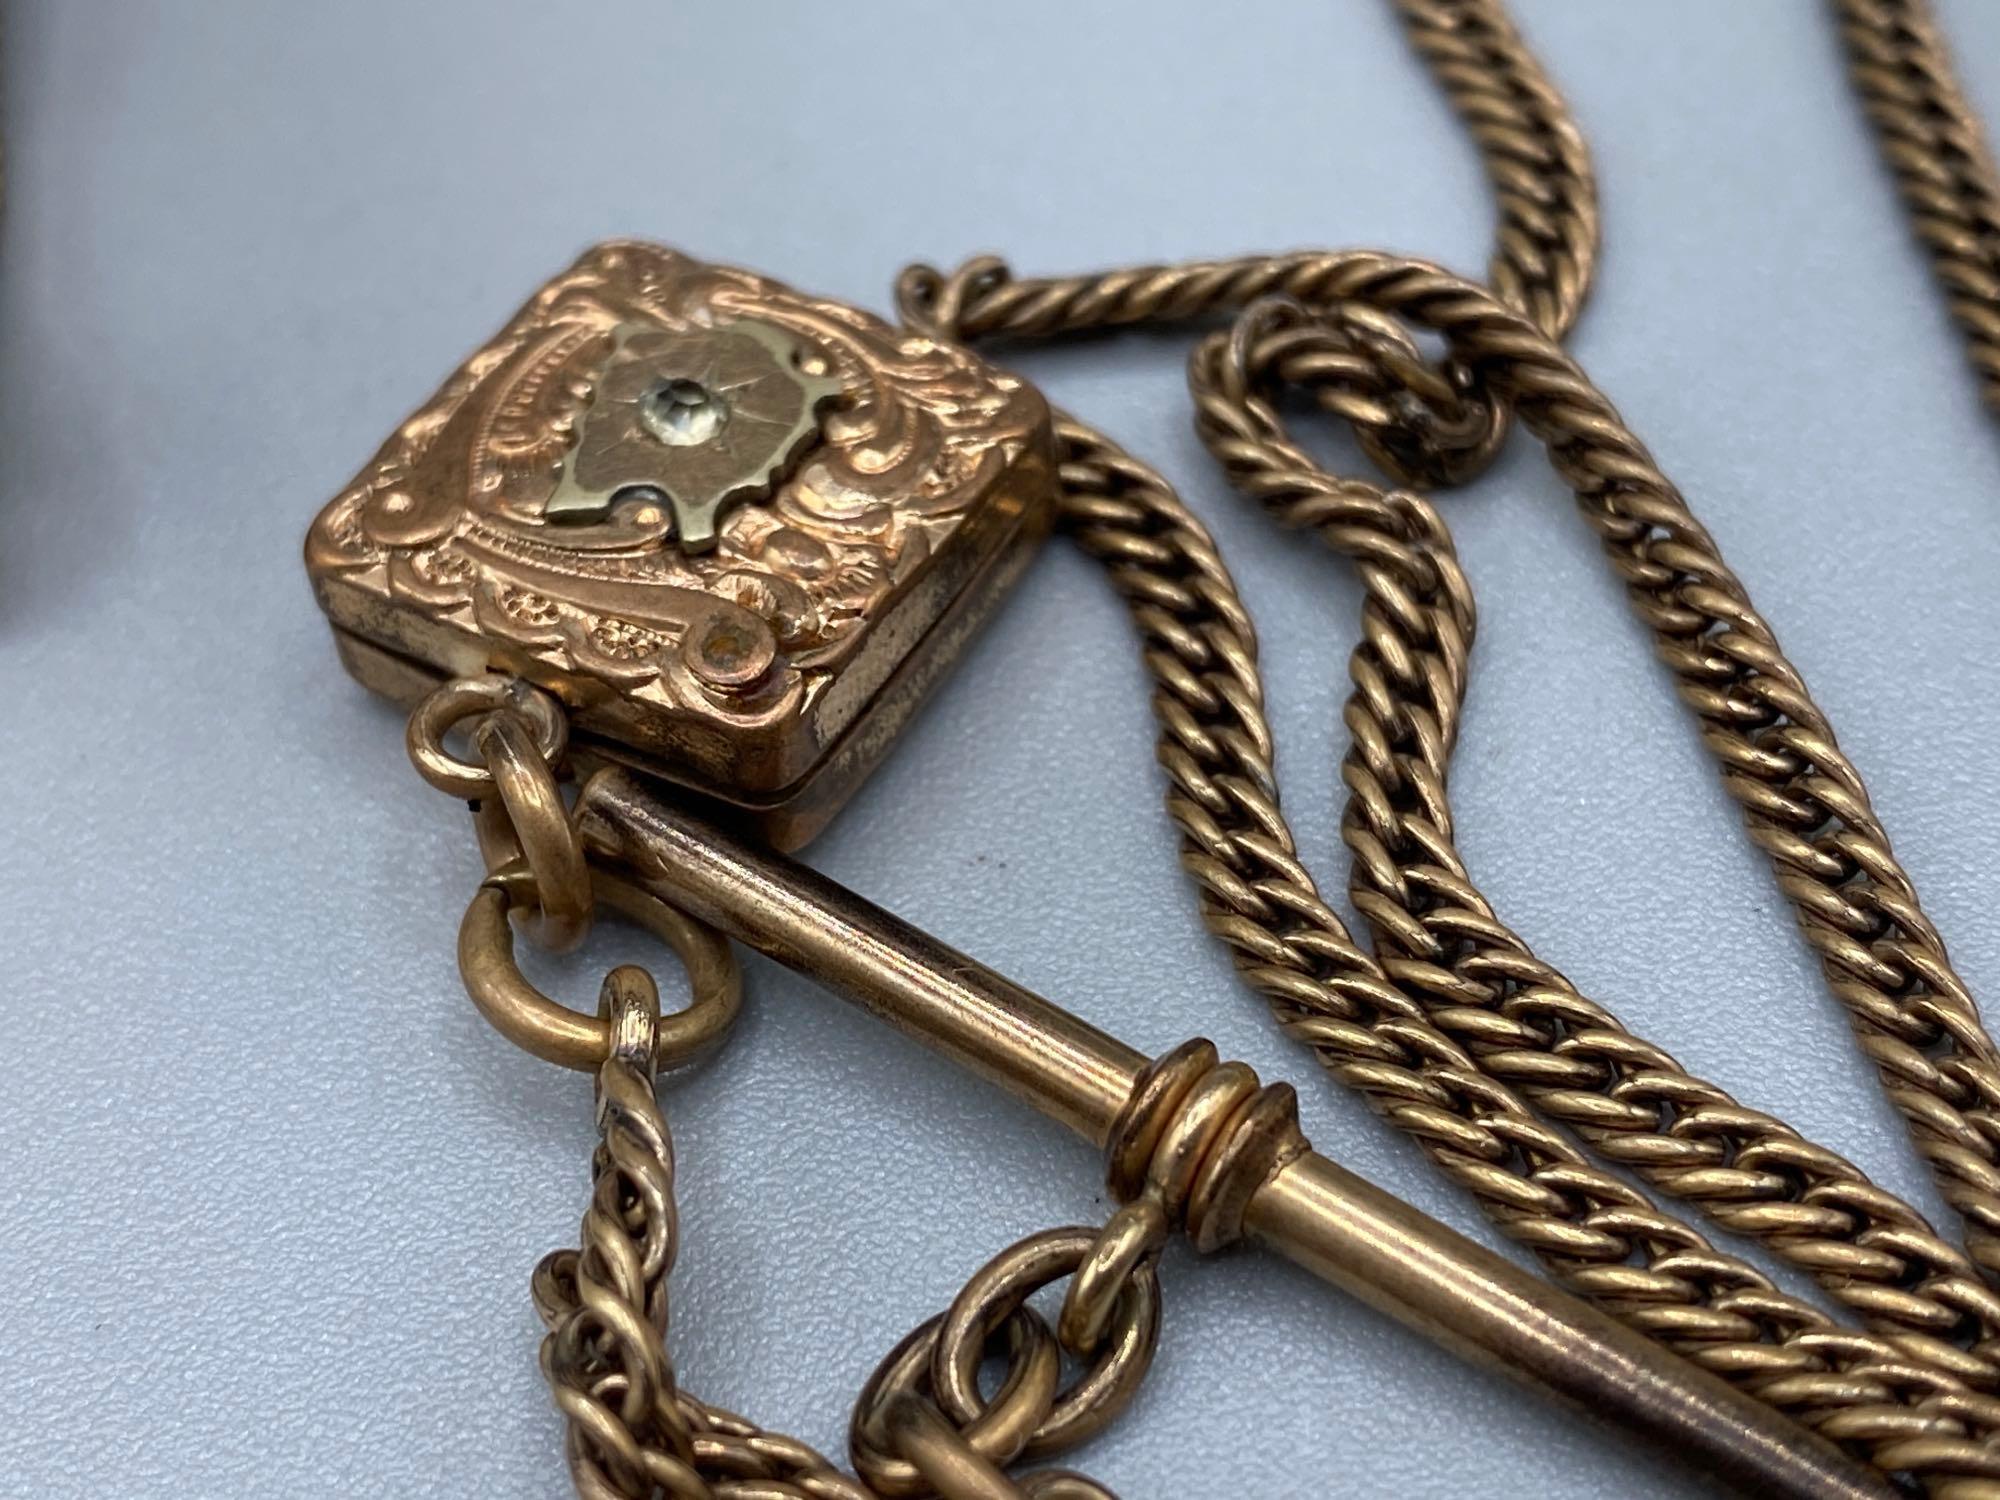 Gold Filled Watch Fobs and chains